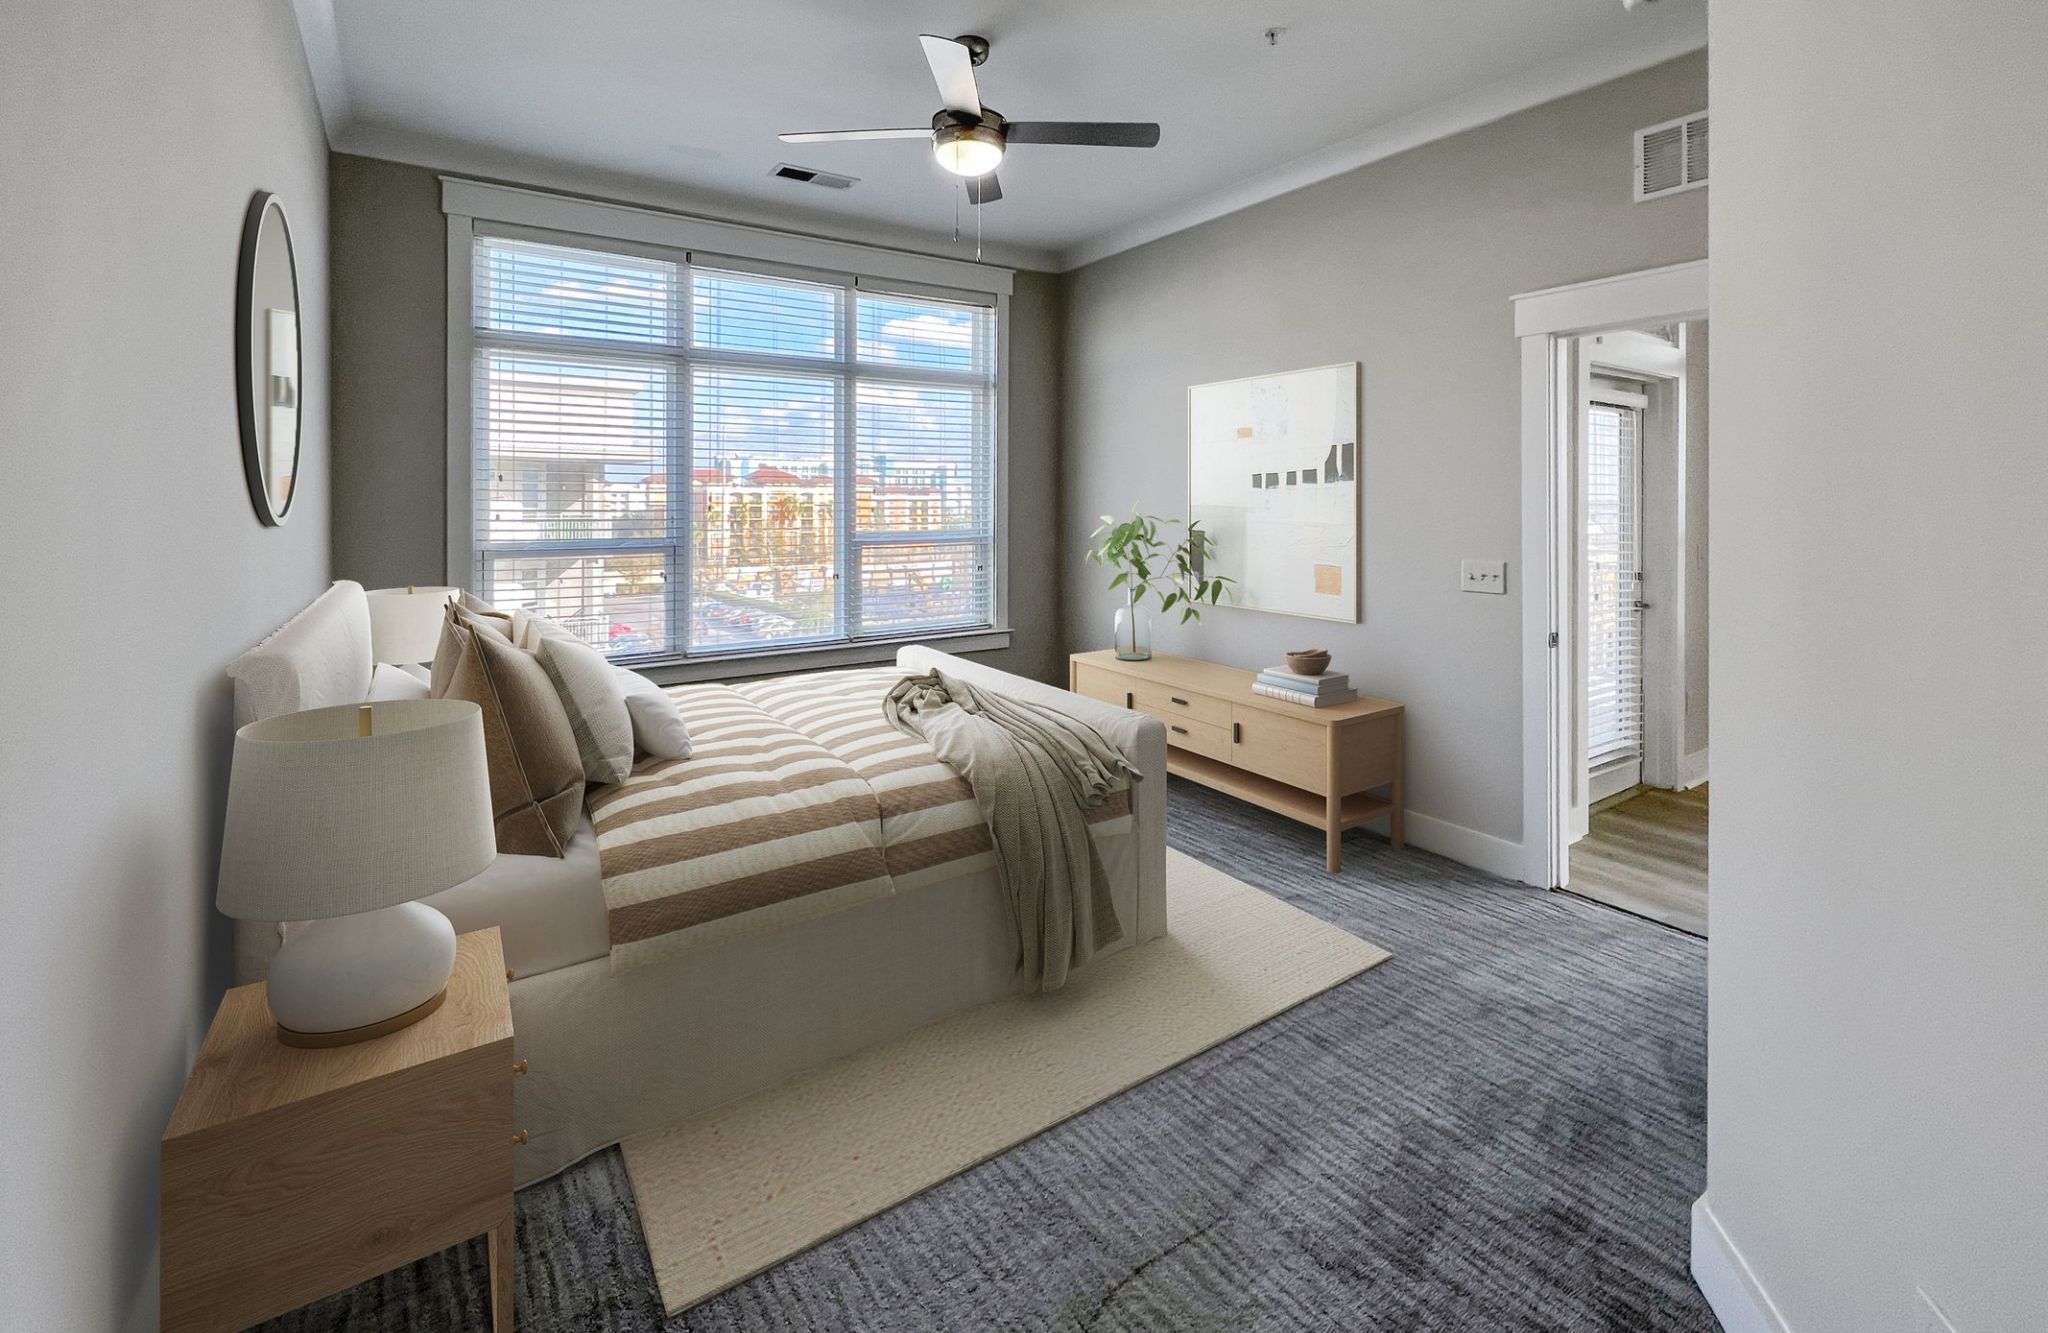 Solstice apartments spacious bedroom with carpeting and large windows furnished with a bed and end tables